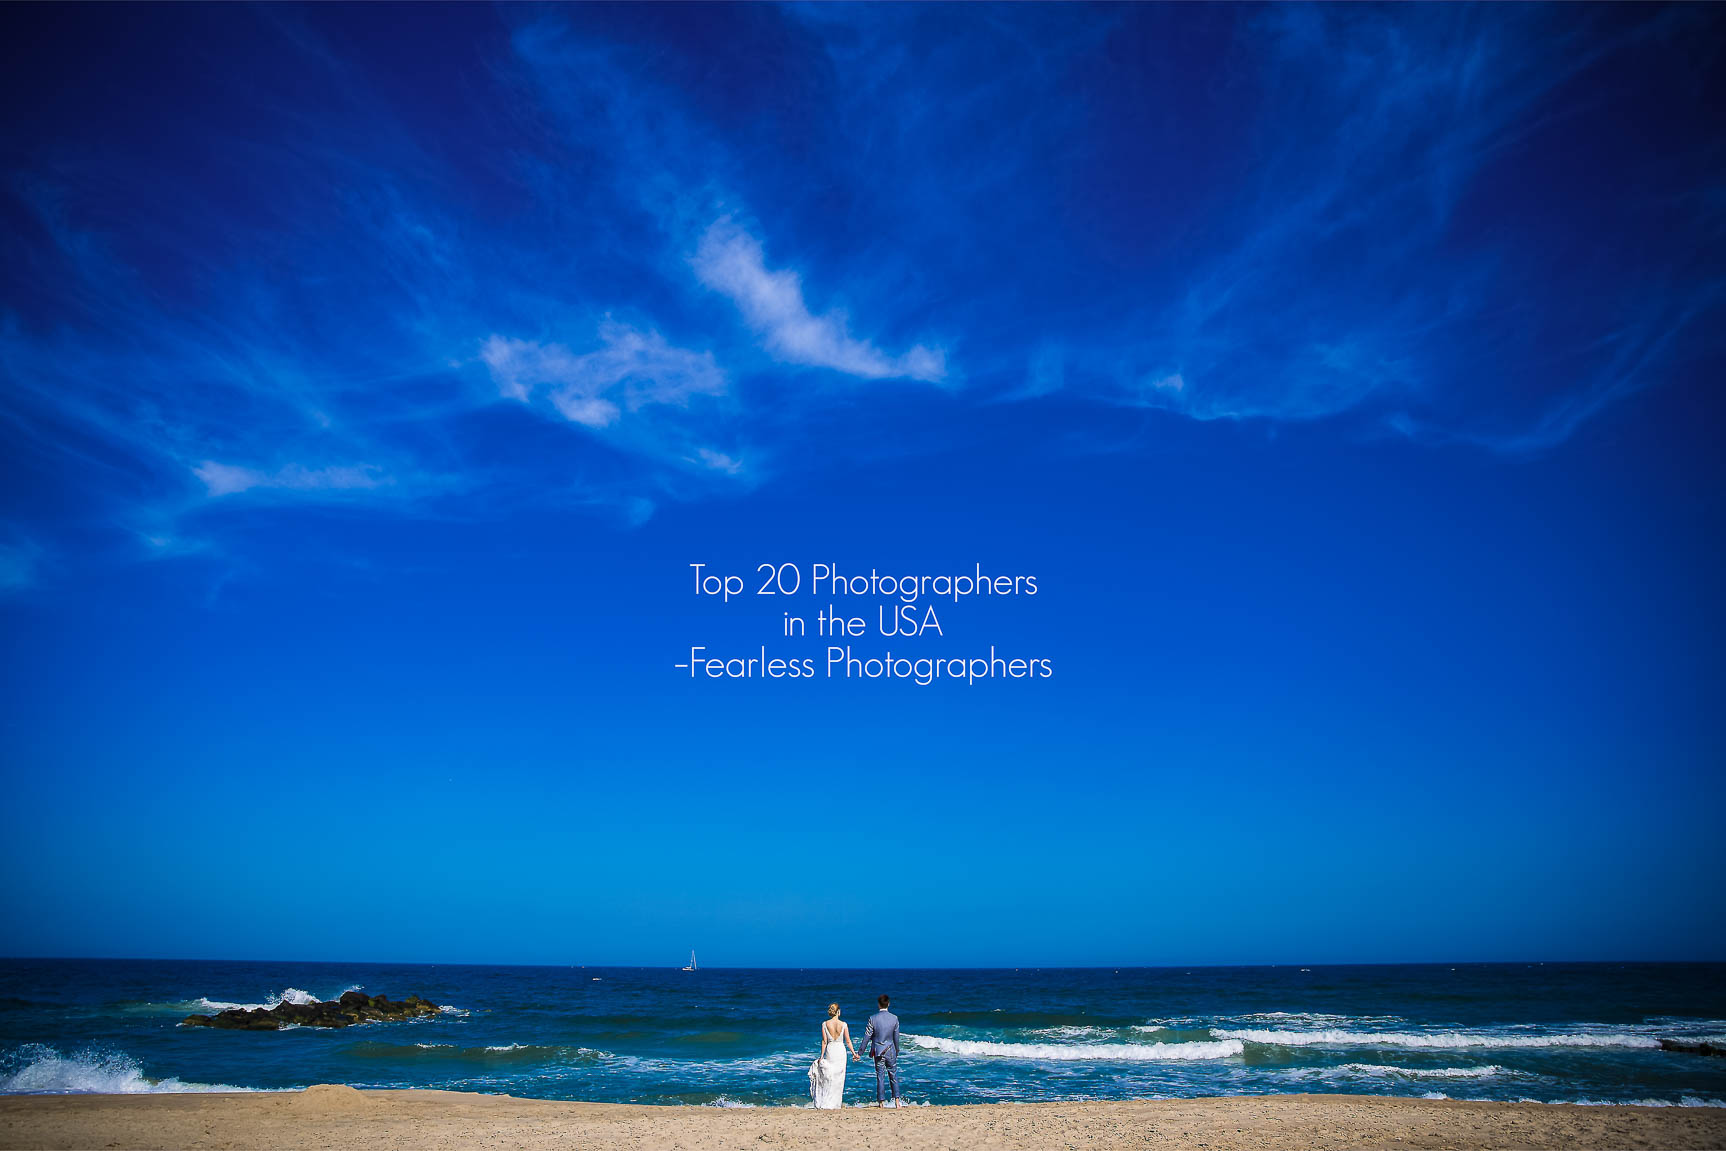 Top 20 USA Wedding Photographer, Lisa Rhinehart, captures this vibrant, colorful image of the bride and groom holding hands as they watch the ocean during their wedding ceremony in Spring Lake, NJ